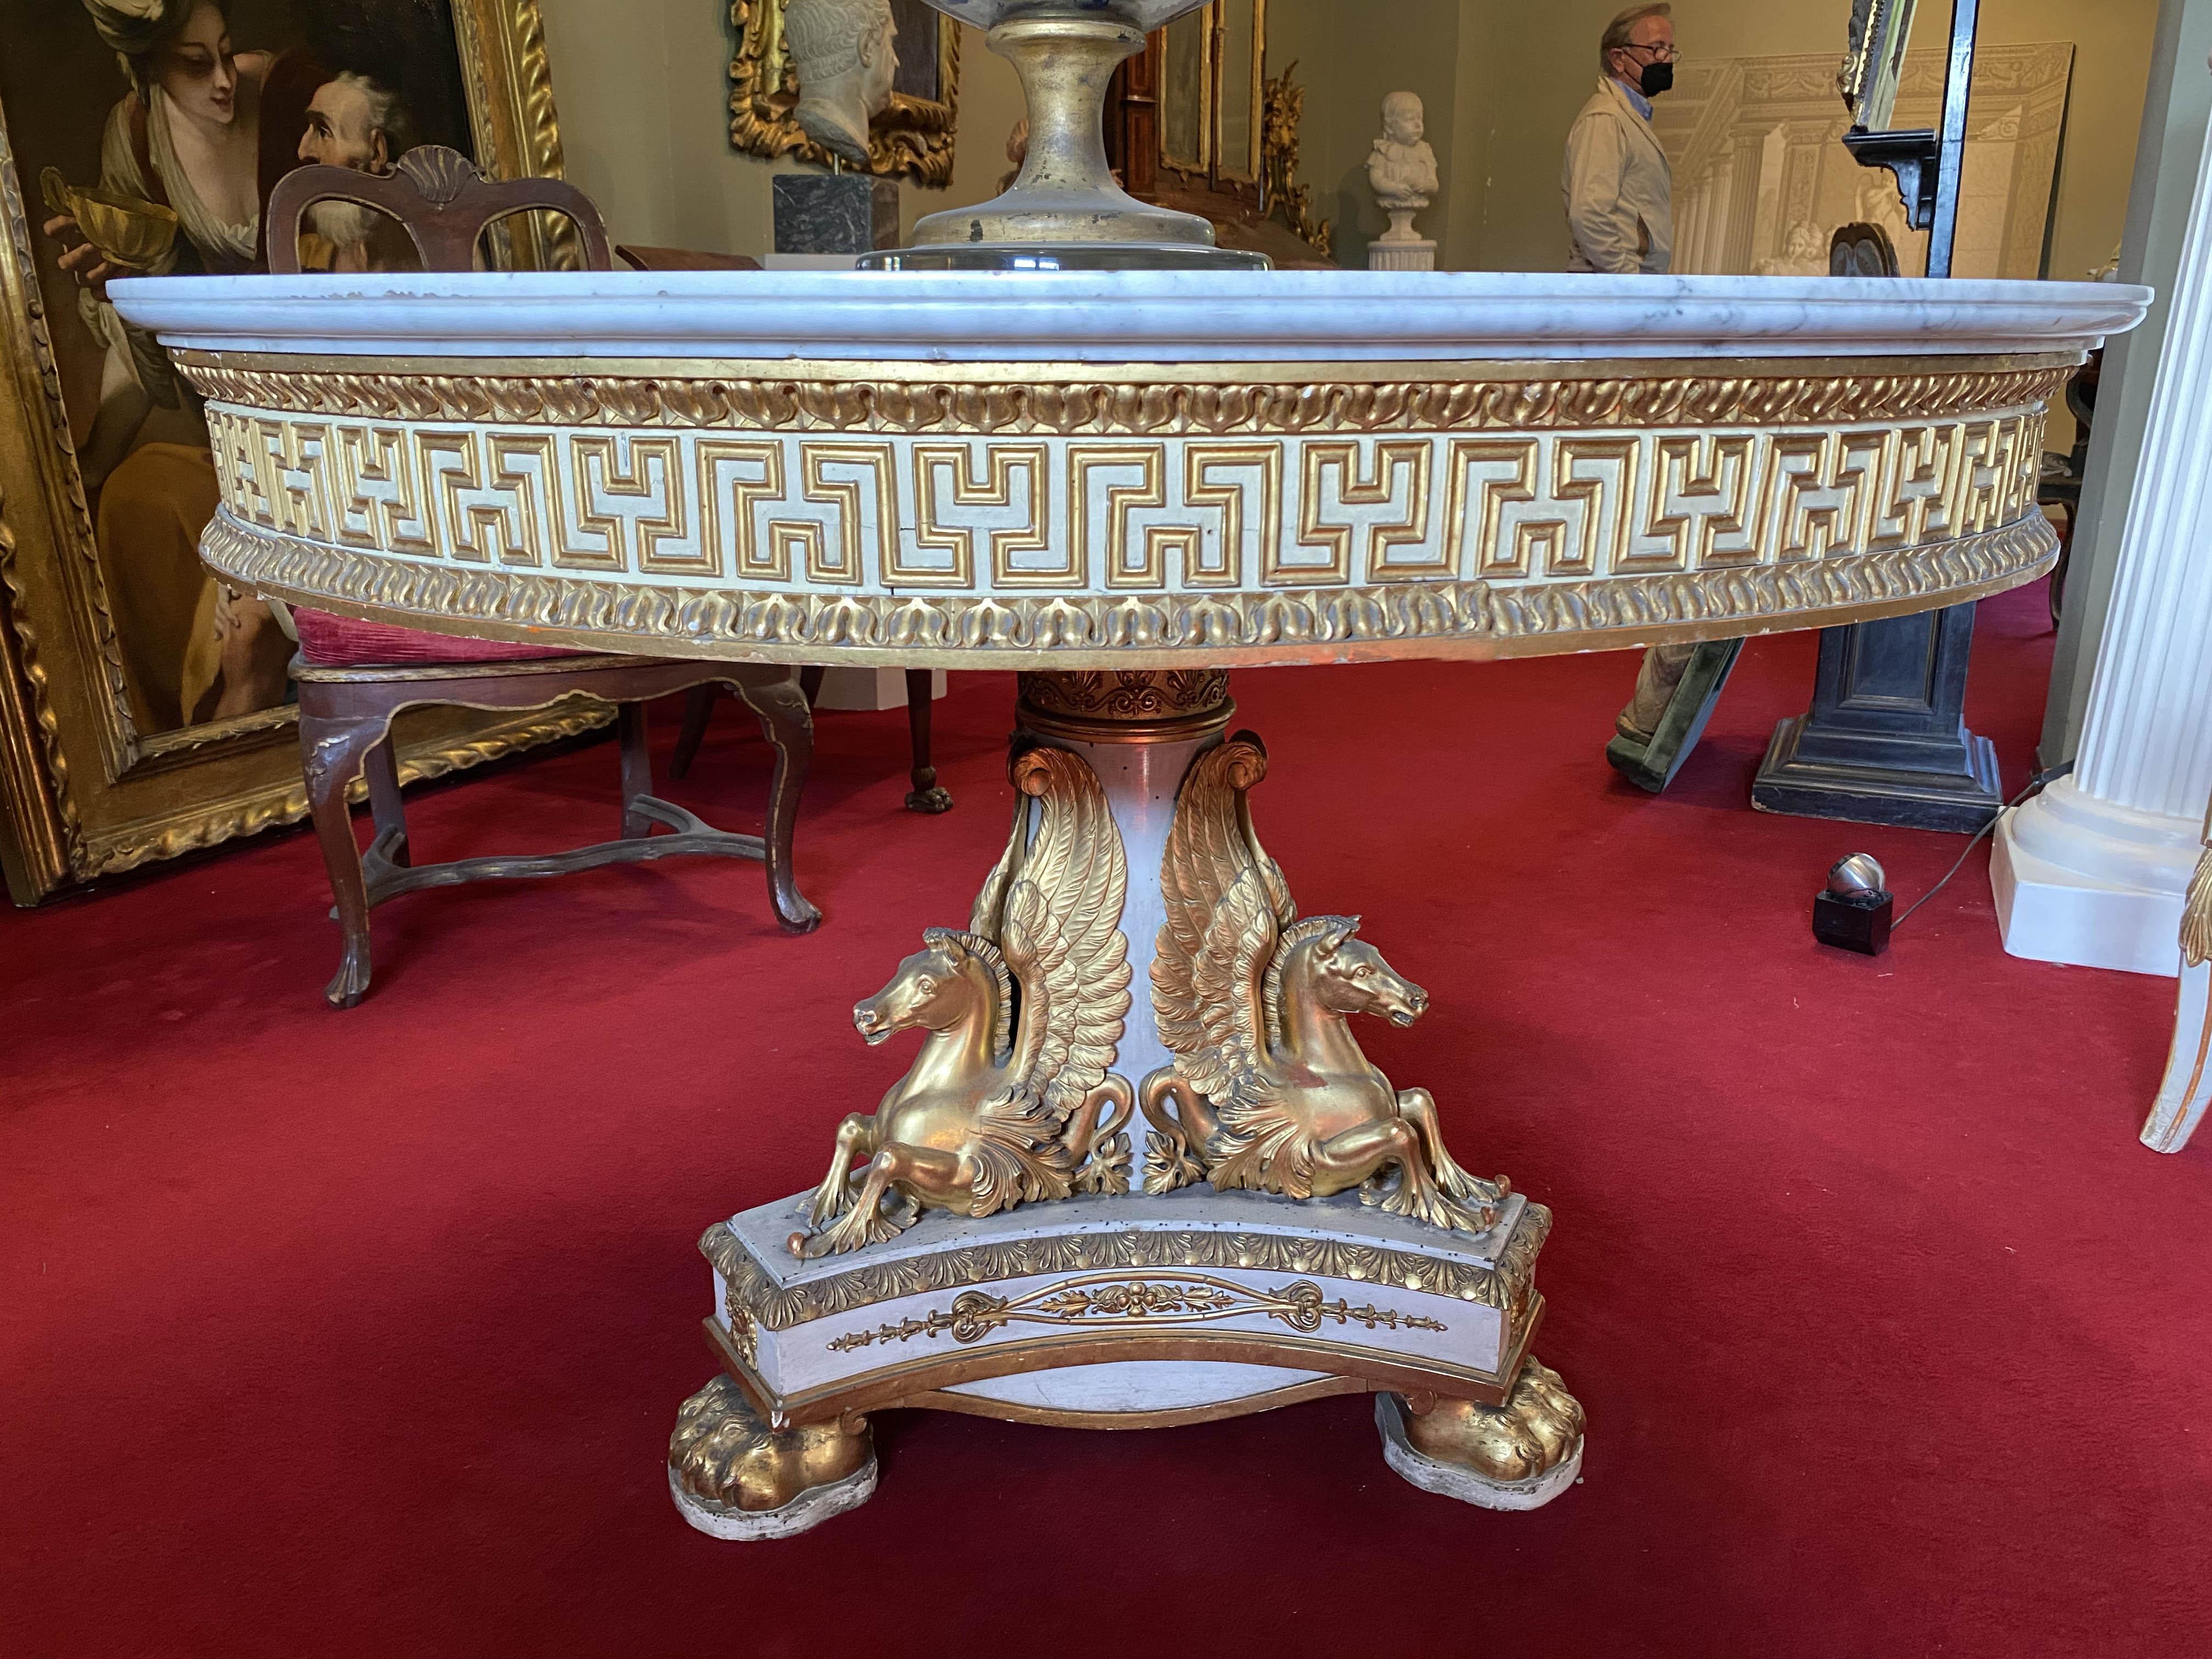 Rare and exceptional Italian ivory painted and parcel-gilt center table with a circular Carrara marble top above triple addorsed finely carved winged horses on a triform base with lion feet. Designed by Domenico Moglia.
Published; Il mobile Impero